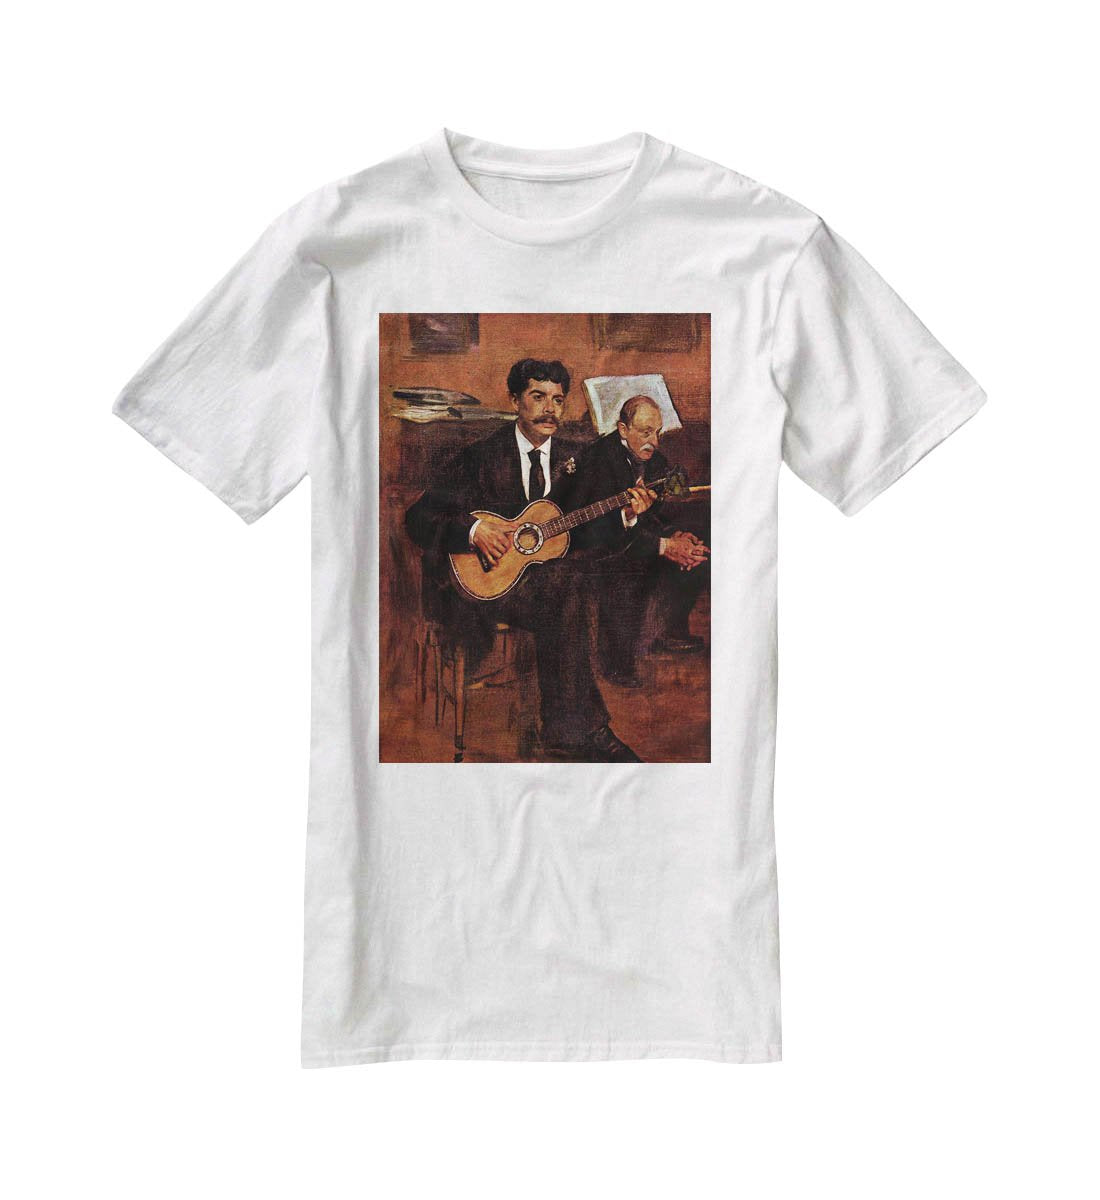 The guitarist Pagans and Monsieur Degas by Manet T-Shirt - Canvas Art Rocks - 5